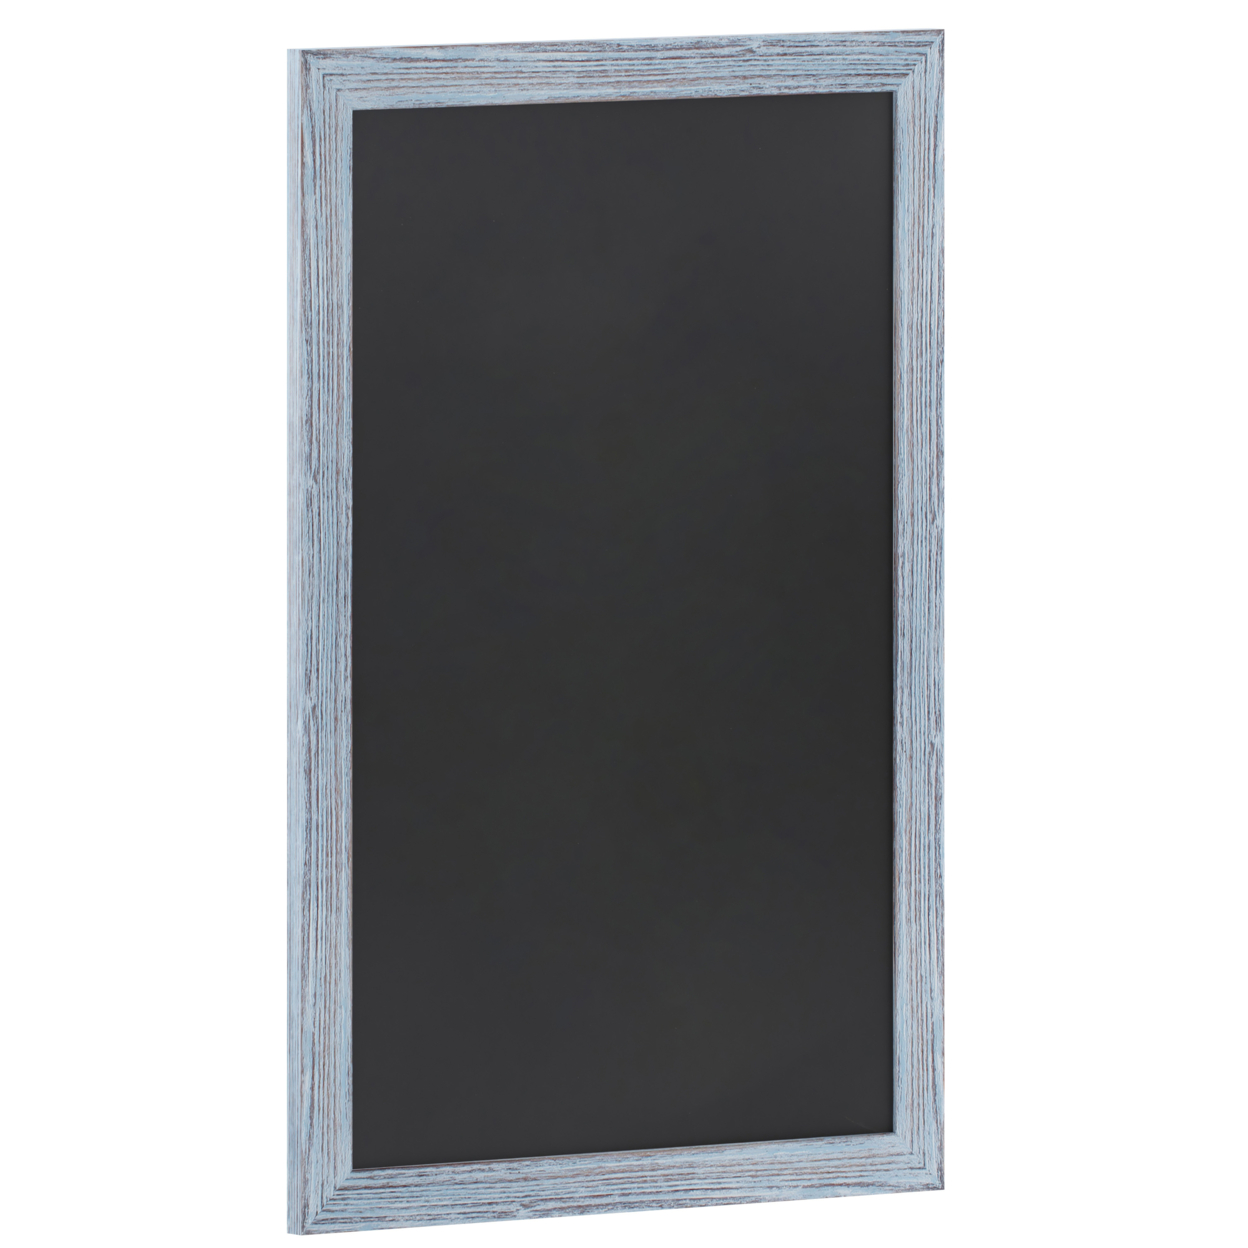 Wall Hanging Chalkboard, Rustic Blue Wood Frame, Rough Hewn Texture